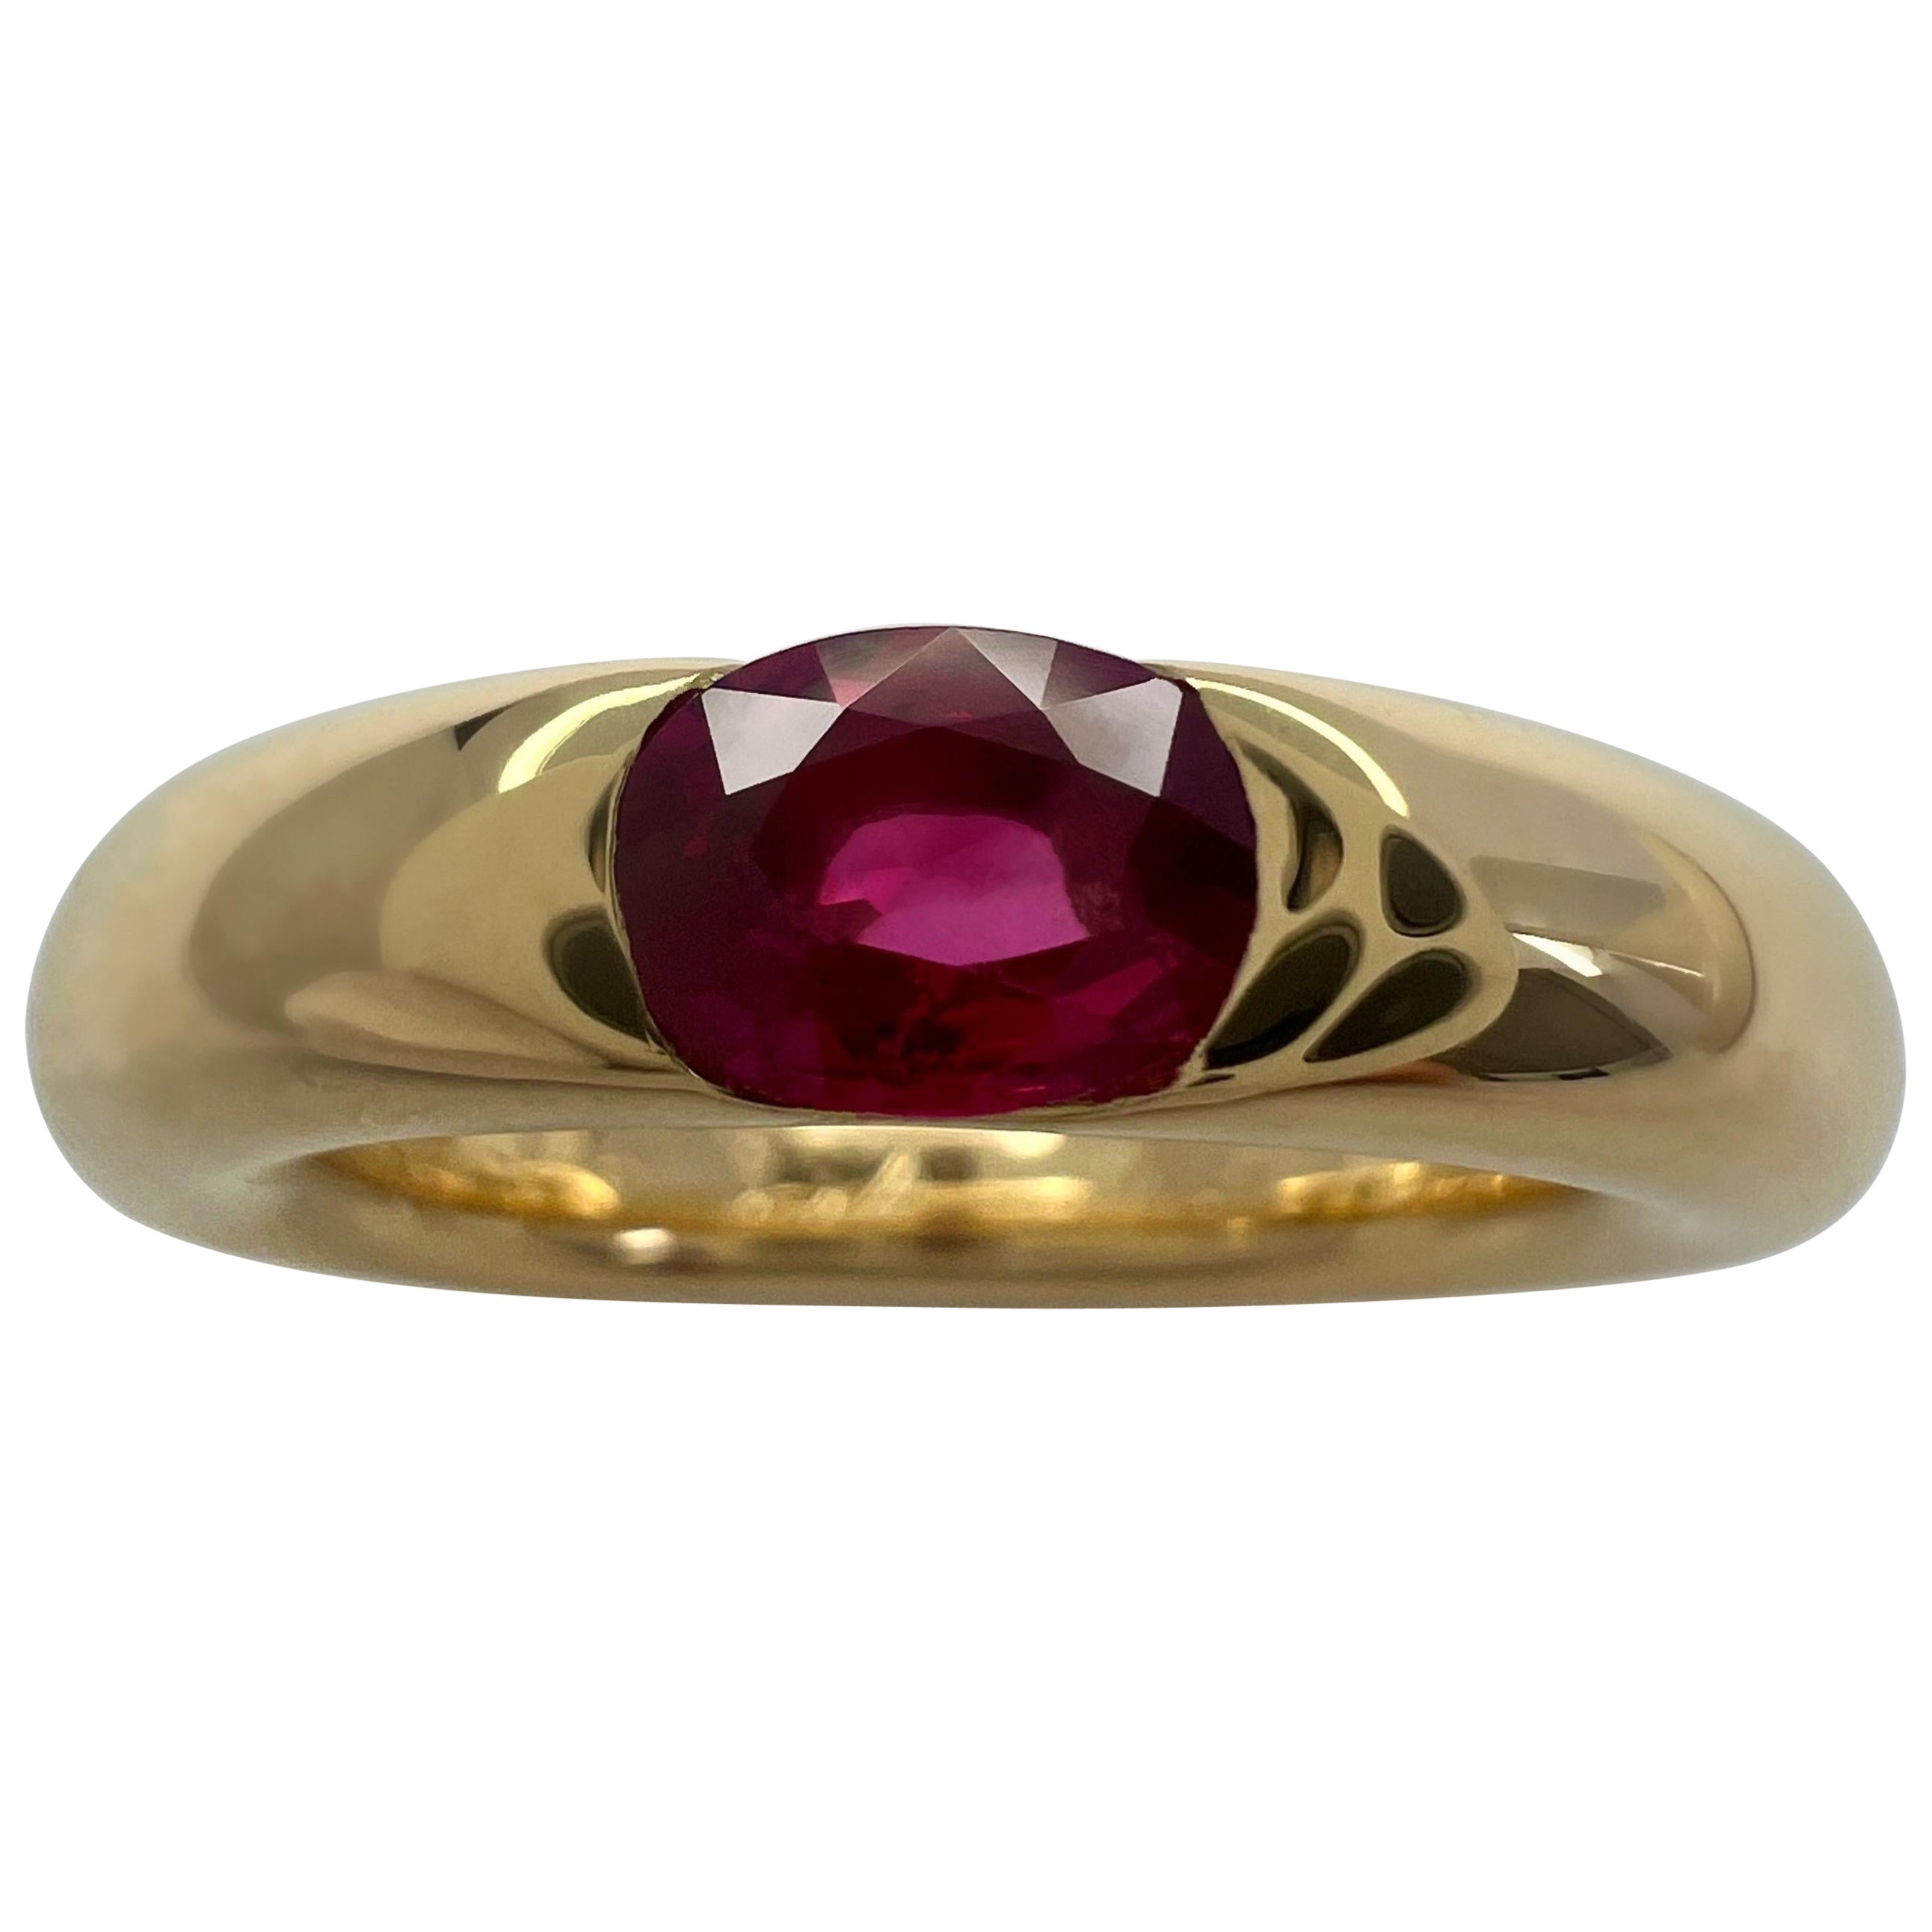 Vintage Cartier Vivid Red Ruby Ellipse 18k Yellow Gold Oval Cut Solitaire Ring